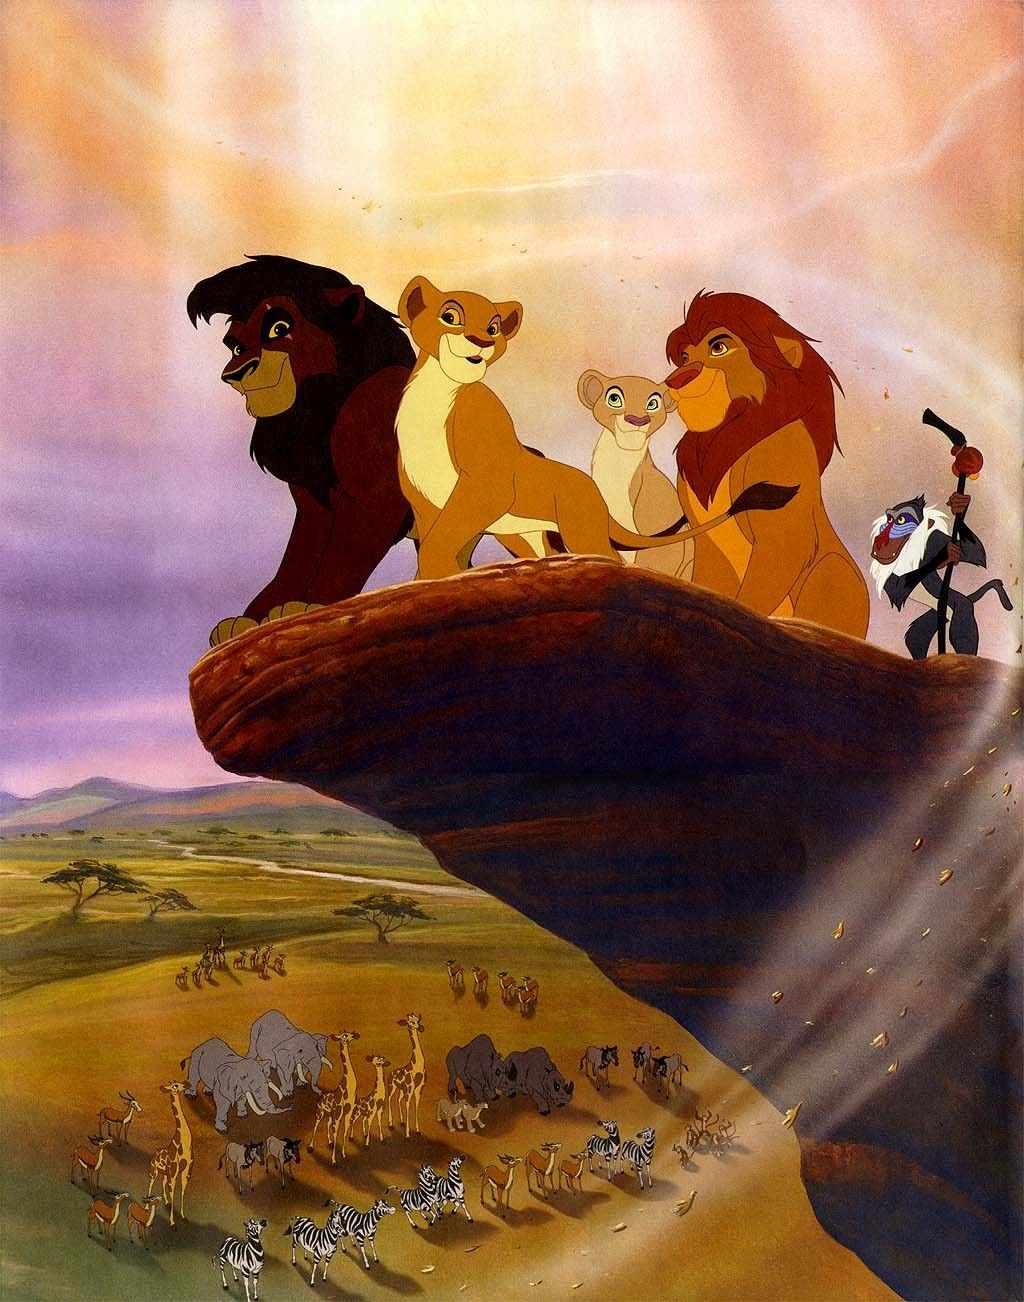 The lion king movie poster with a group of animals - The Lion King